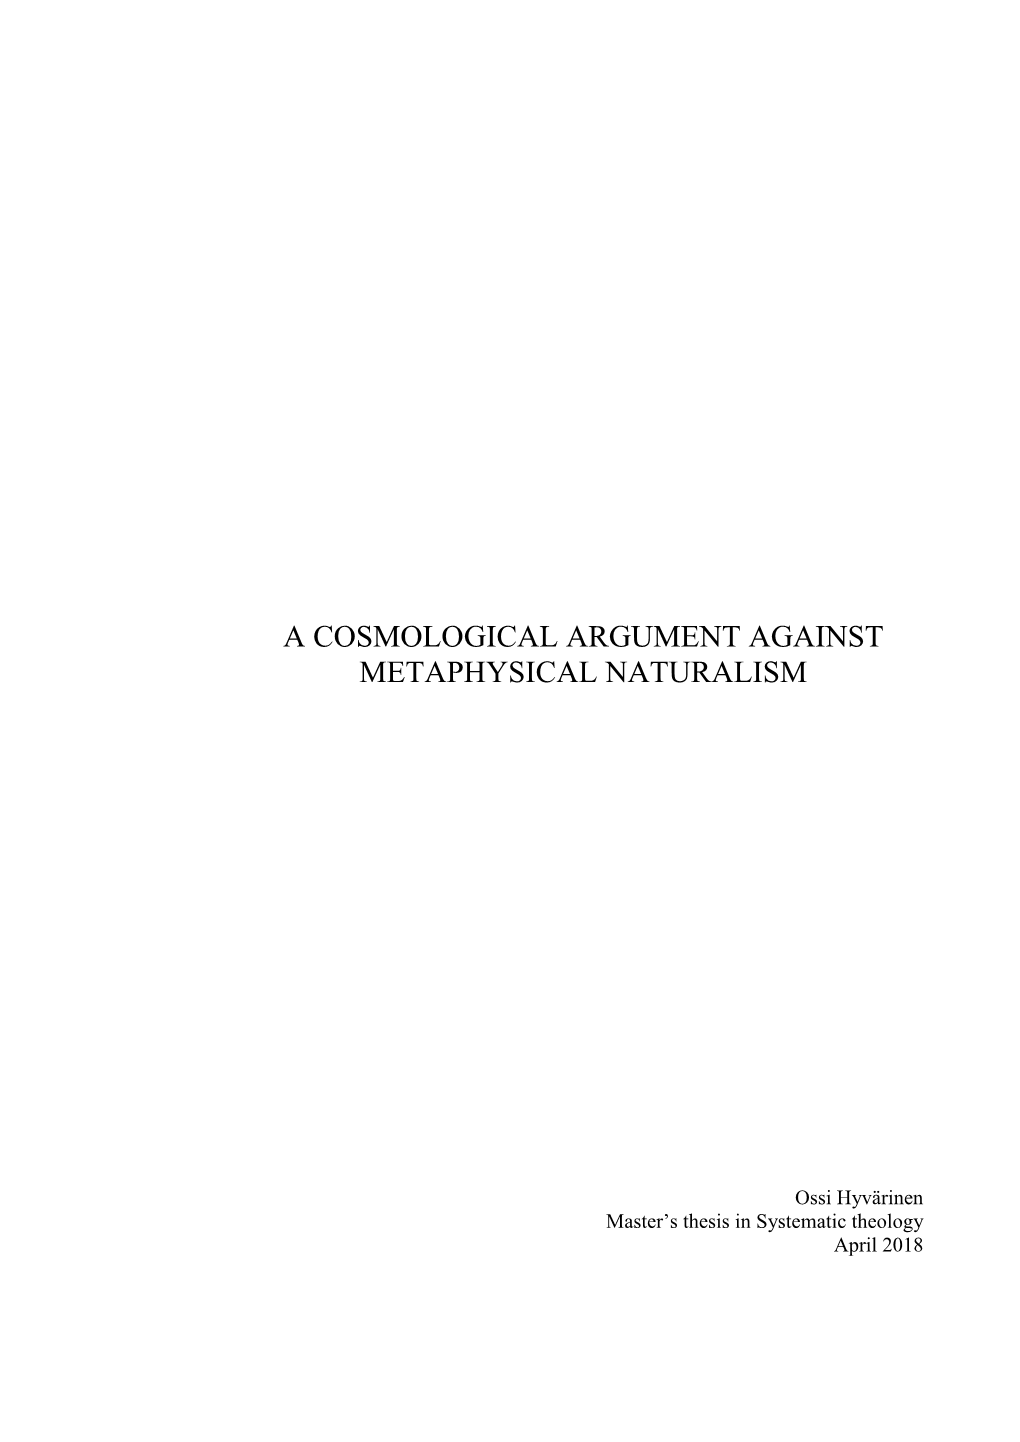 A Cosmological Argument Against Metaphysical Naturalism